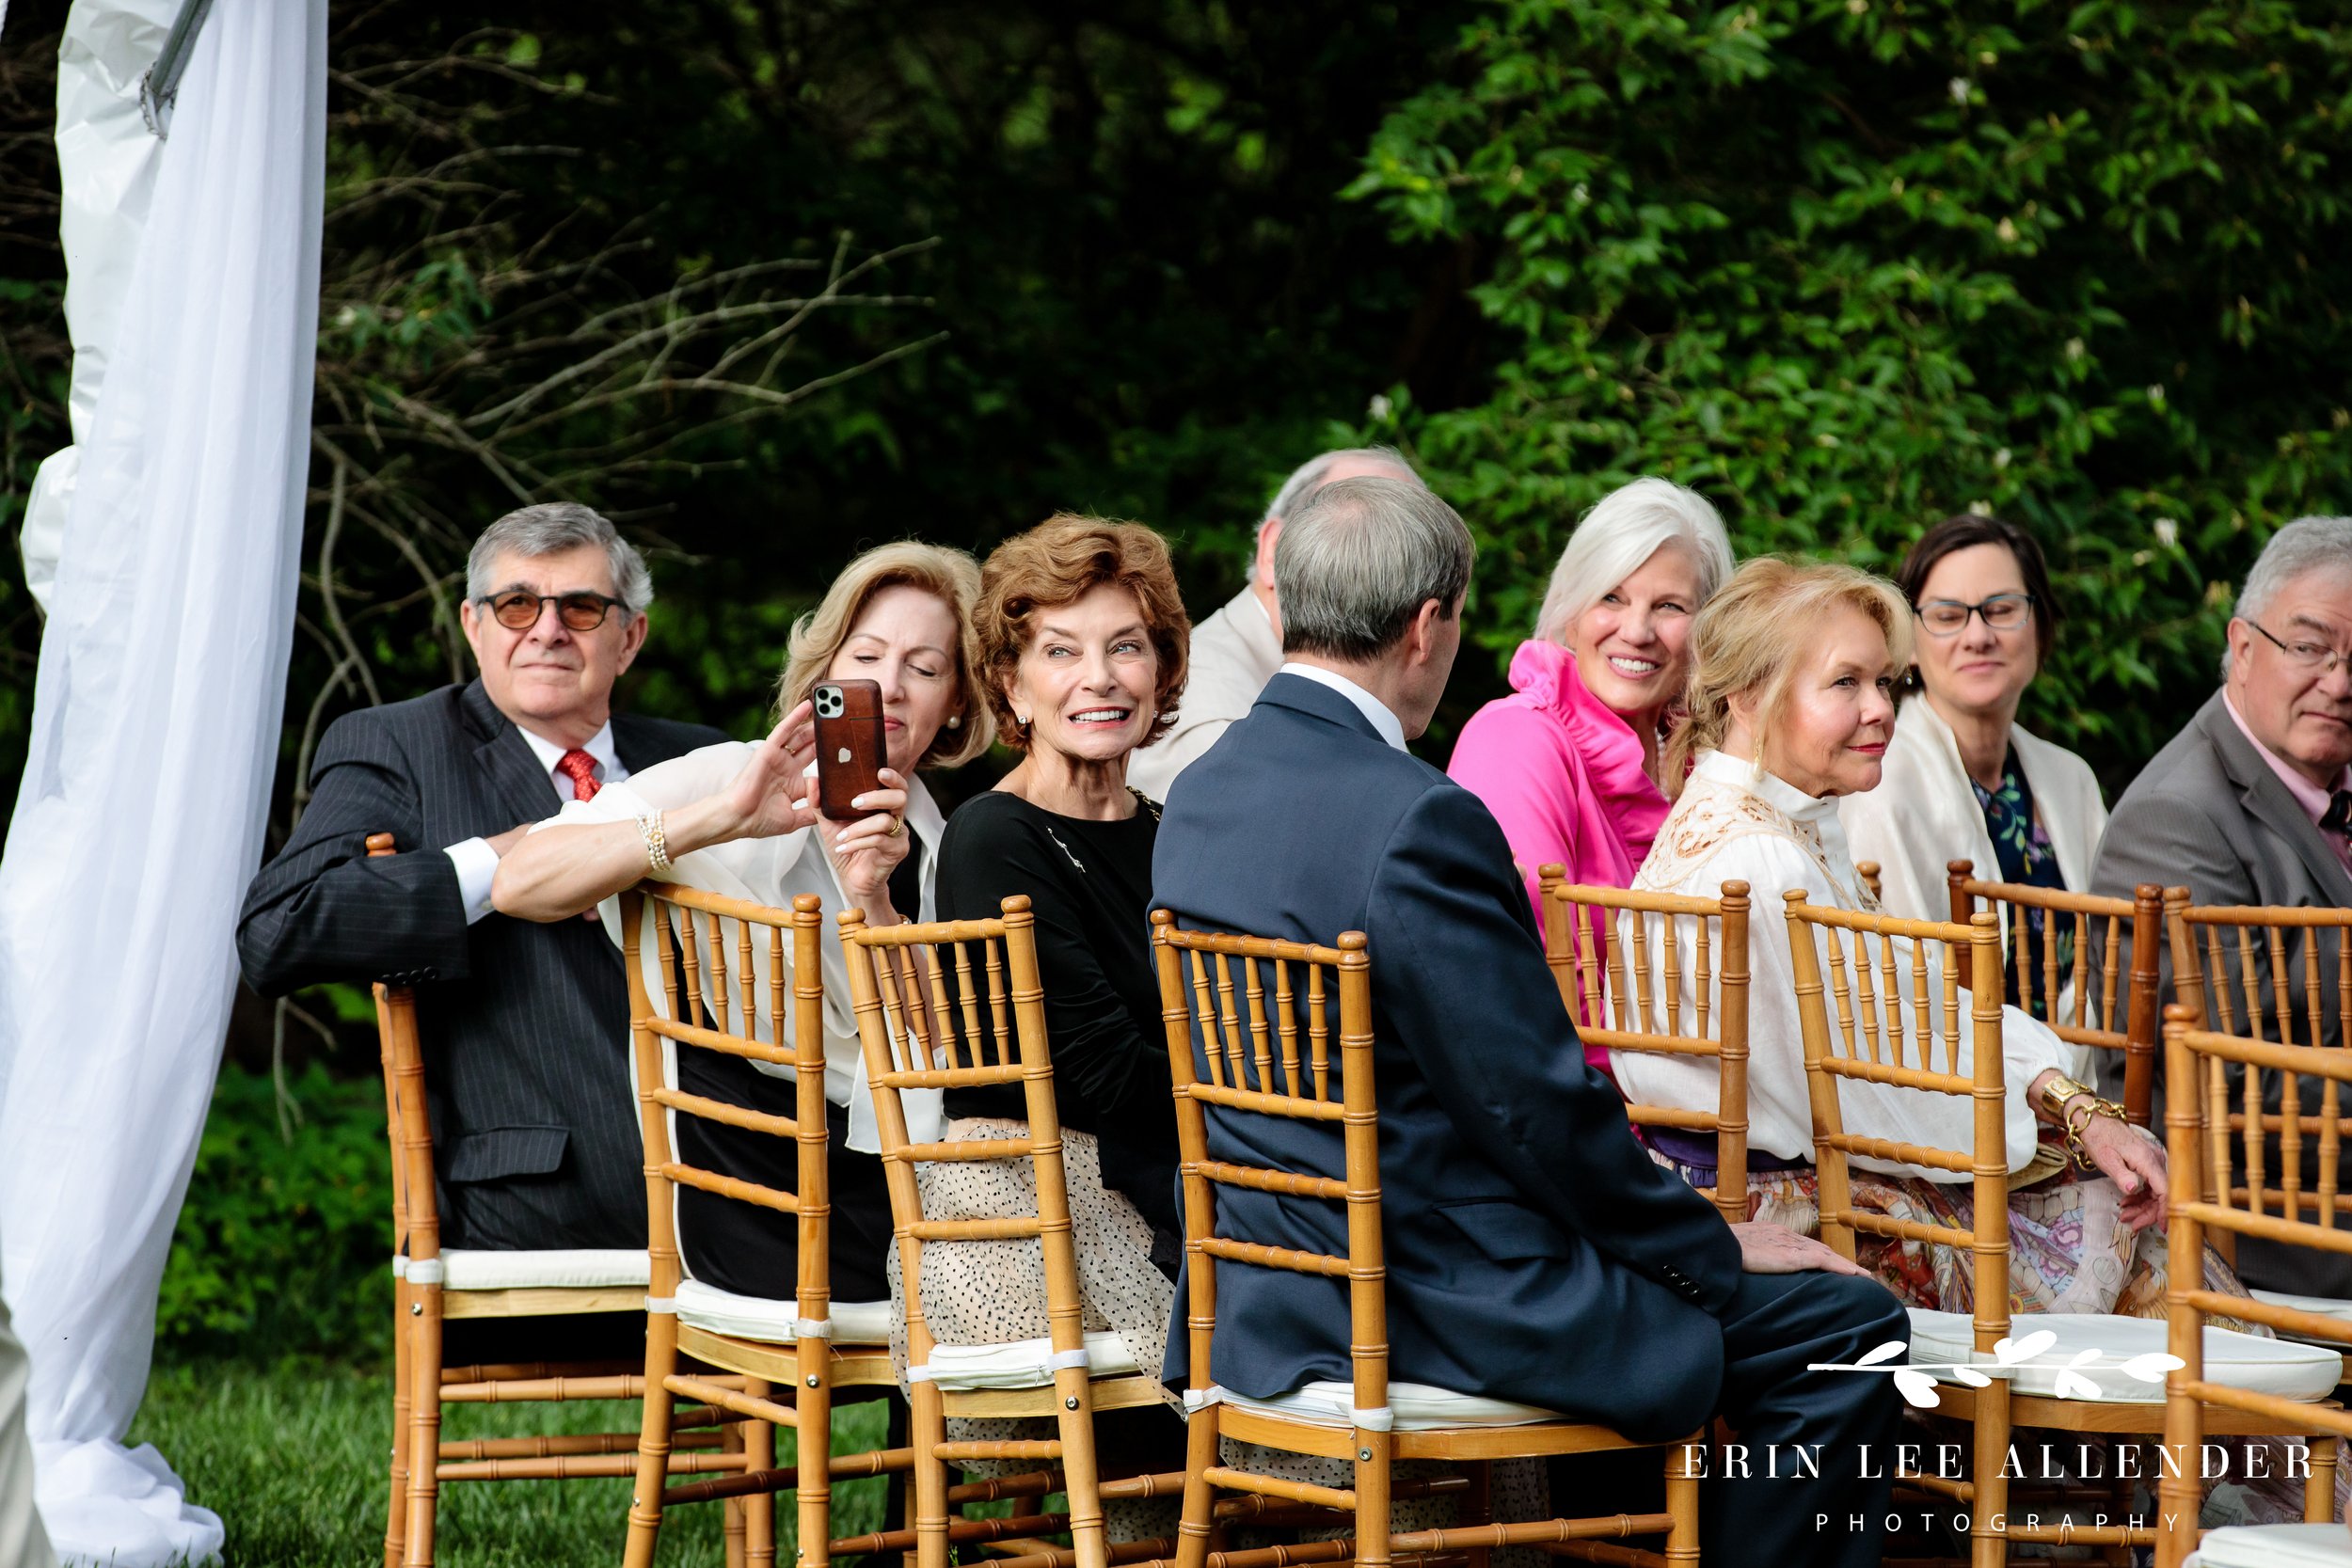 Guests-watching-bride-down-aisle